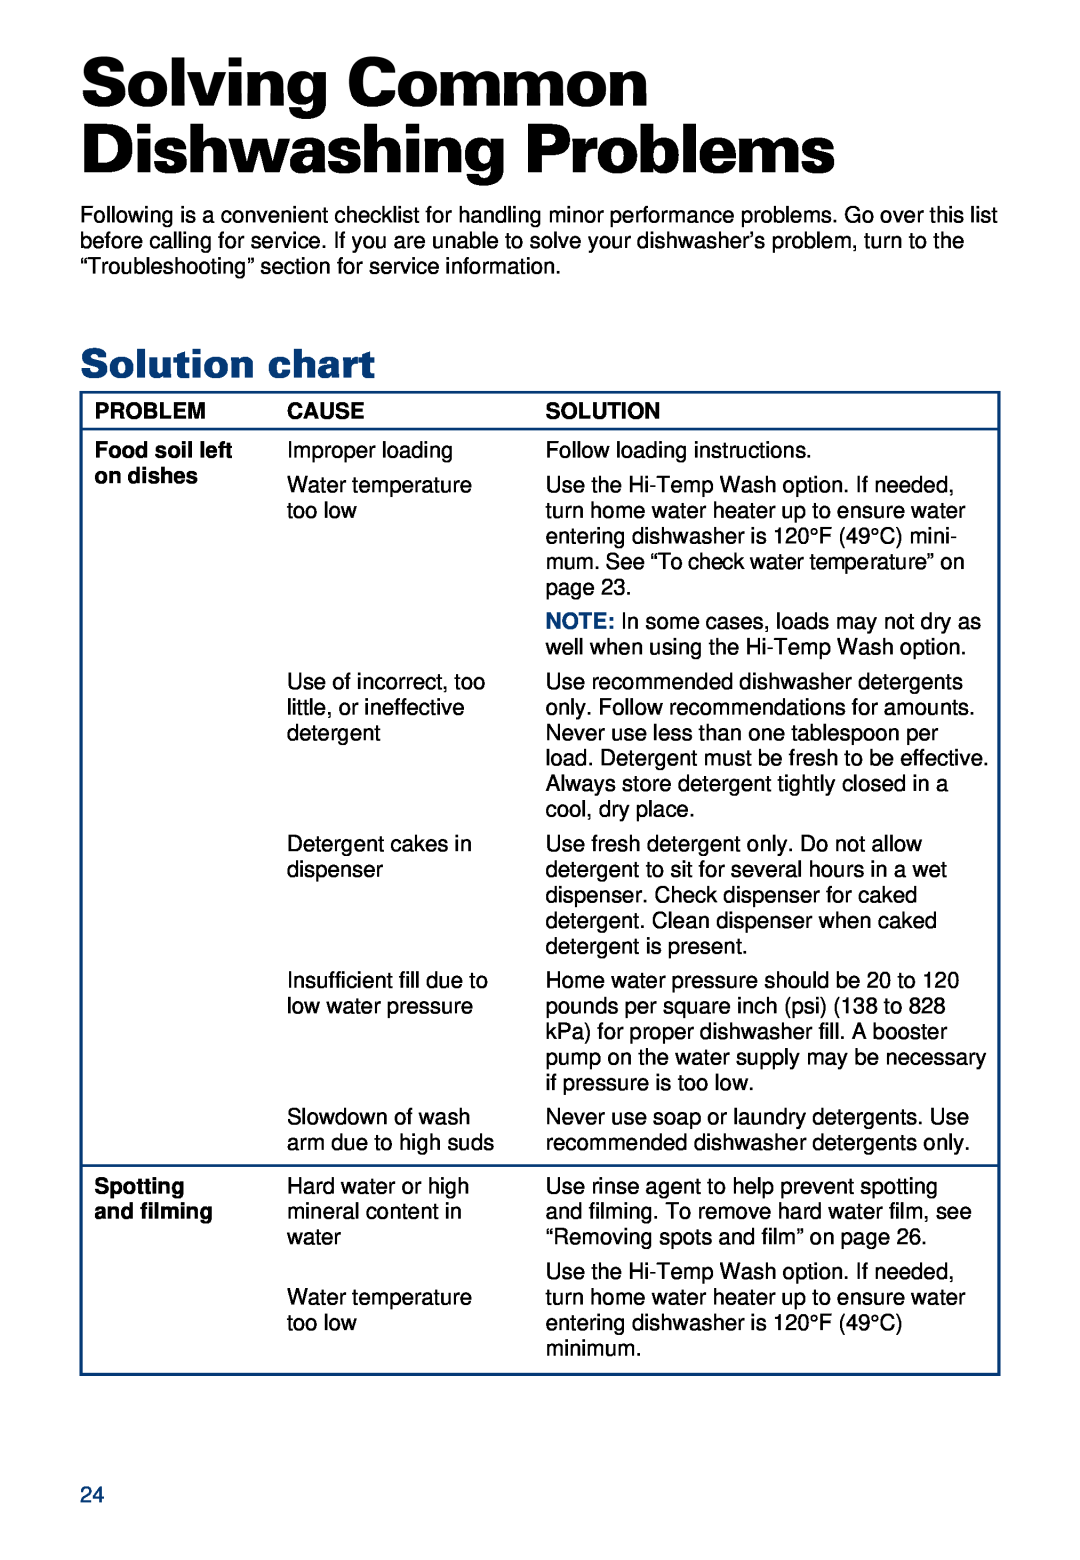 Whirlpool 900 warranty Solving Common Dishwashing Problems, Solution chart 